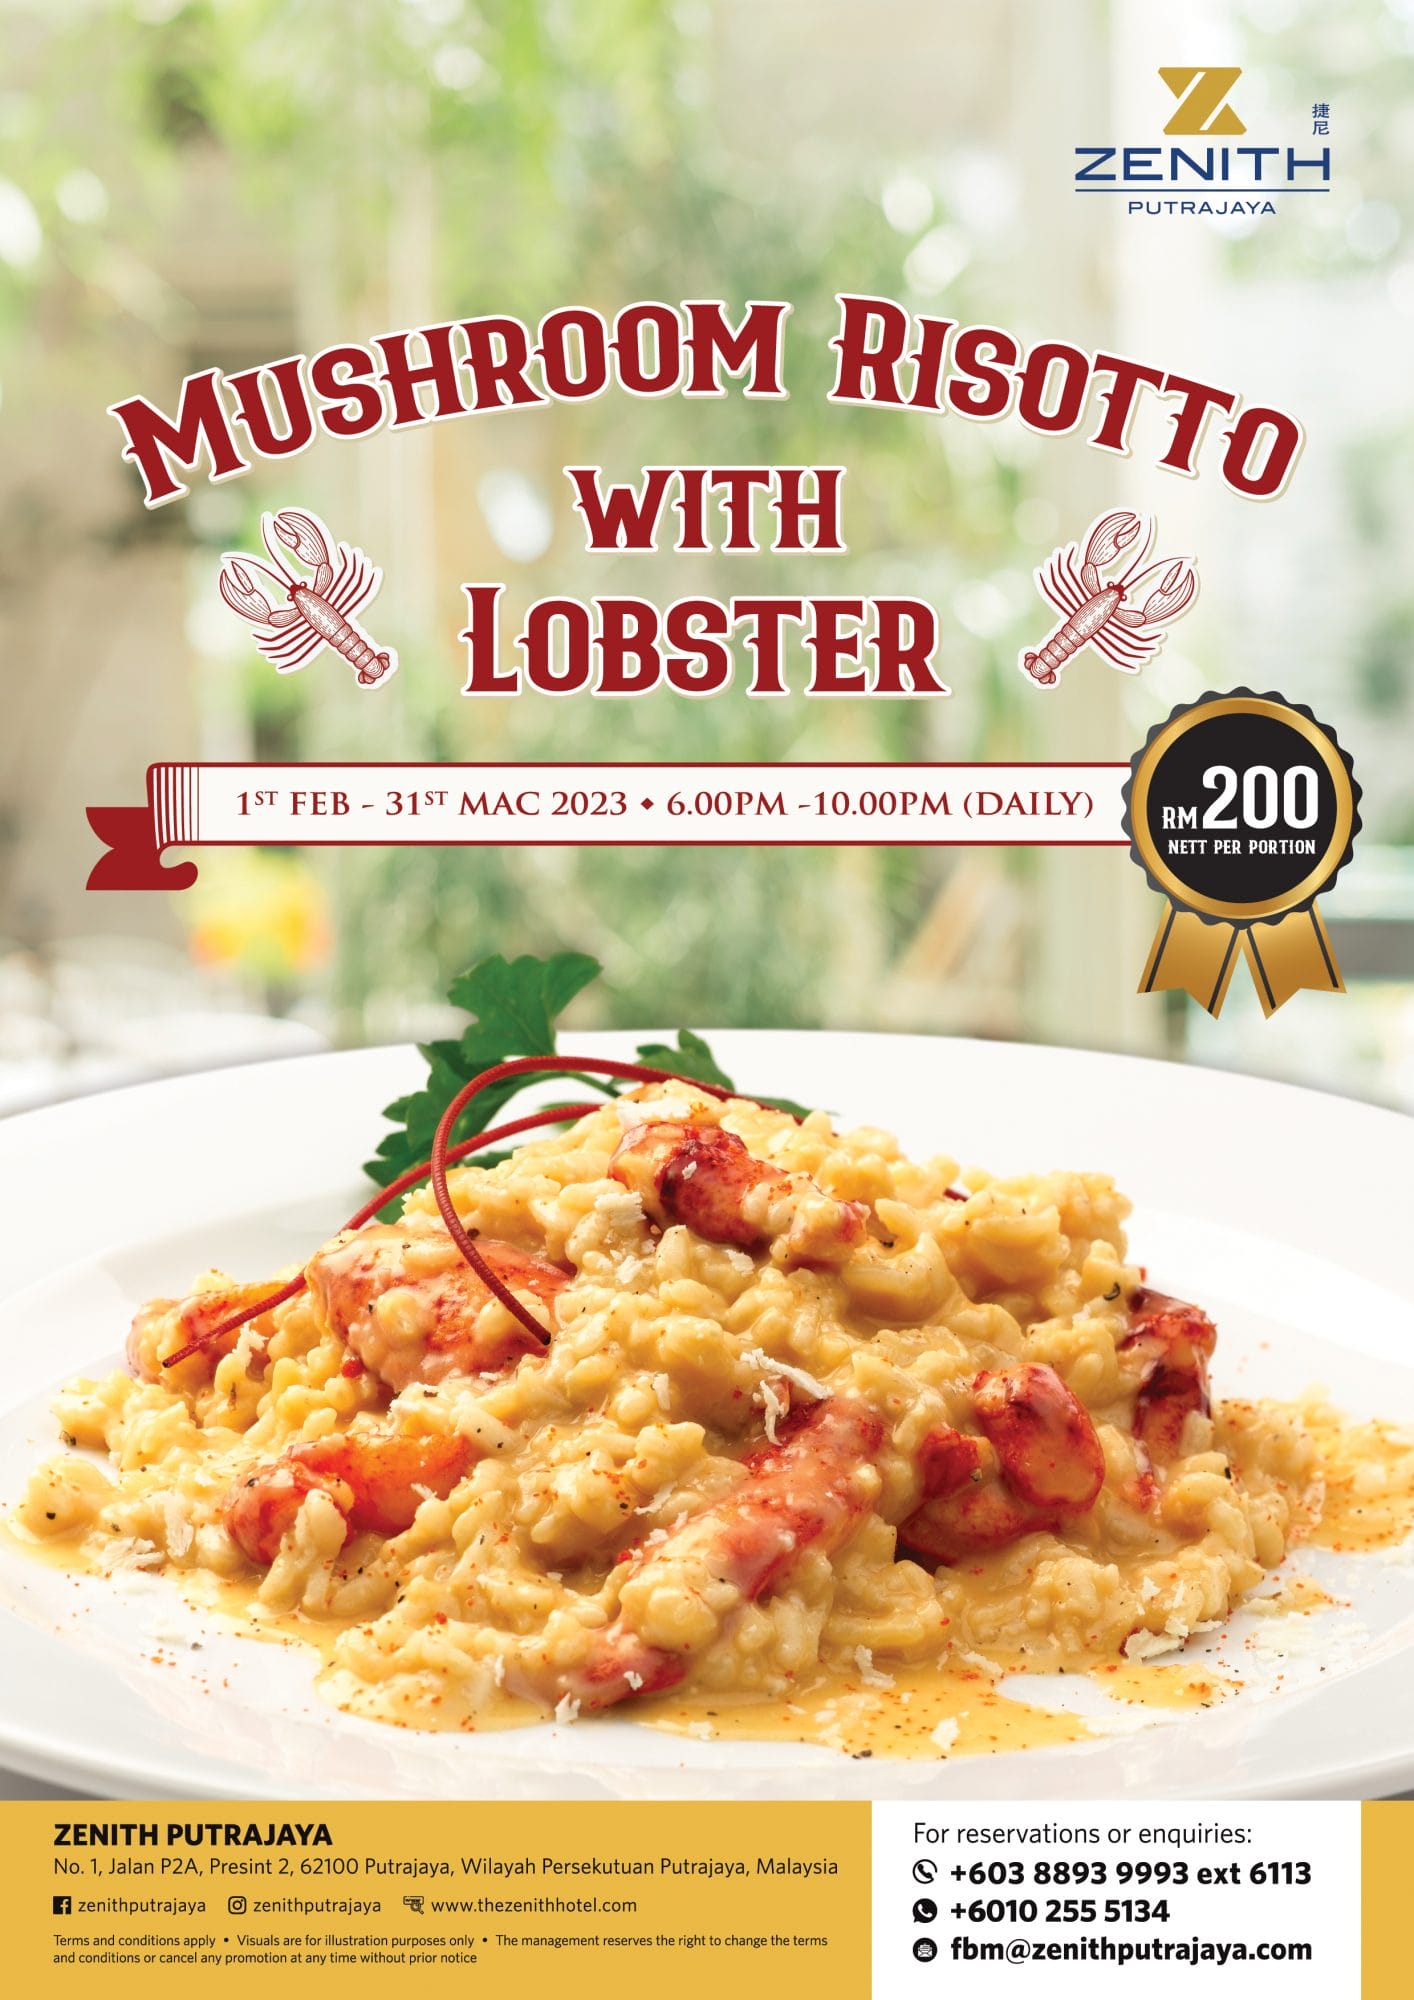 ZP_Mushroom Risotto with Lobster (003)